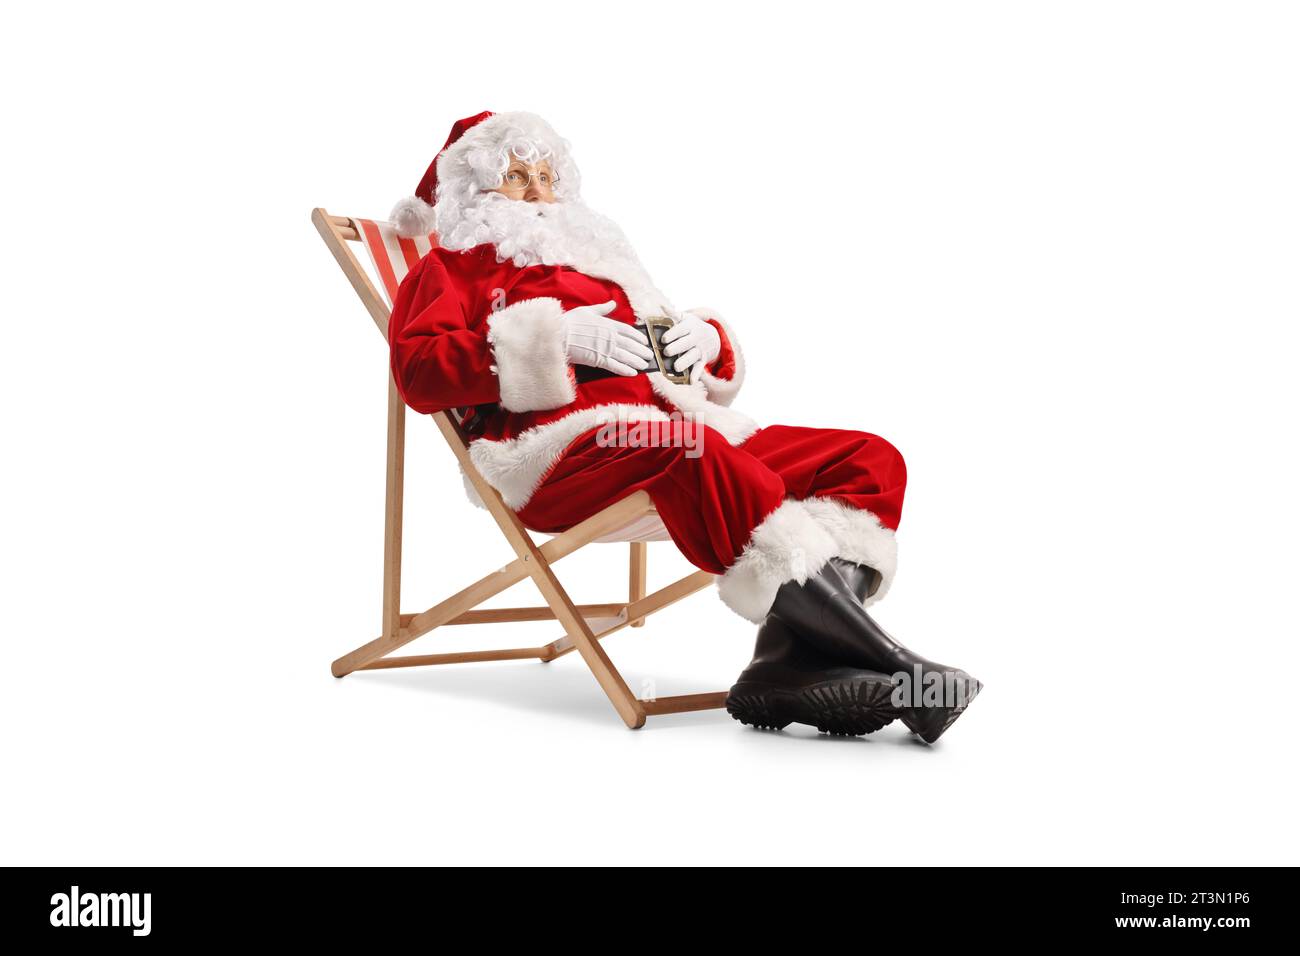 Santa claus sitting on a beach chair and relaxing isolated on white background Stock Photo